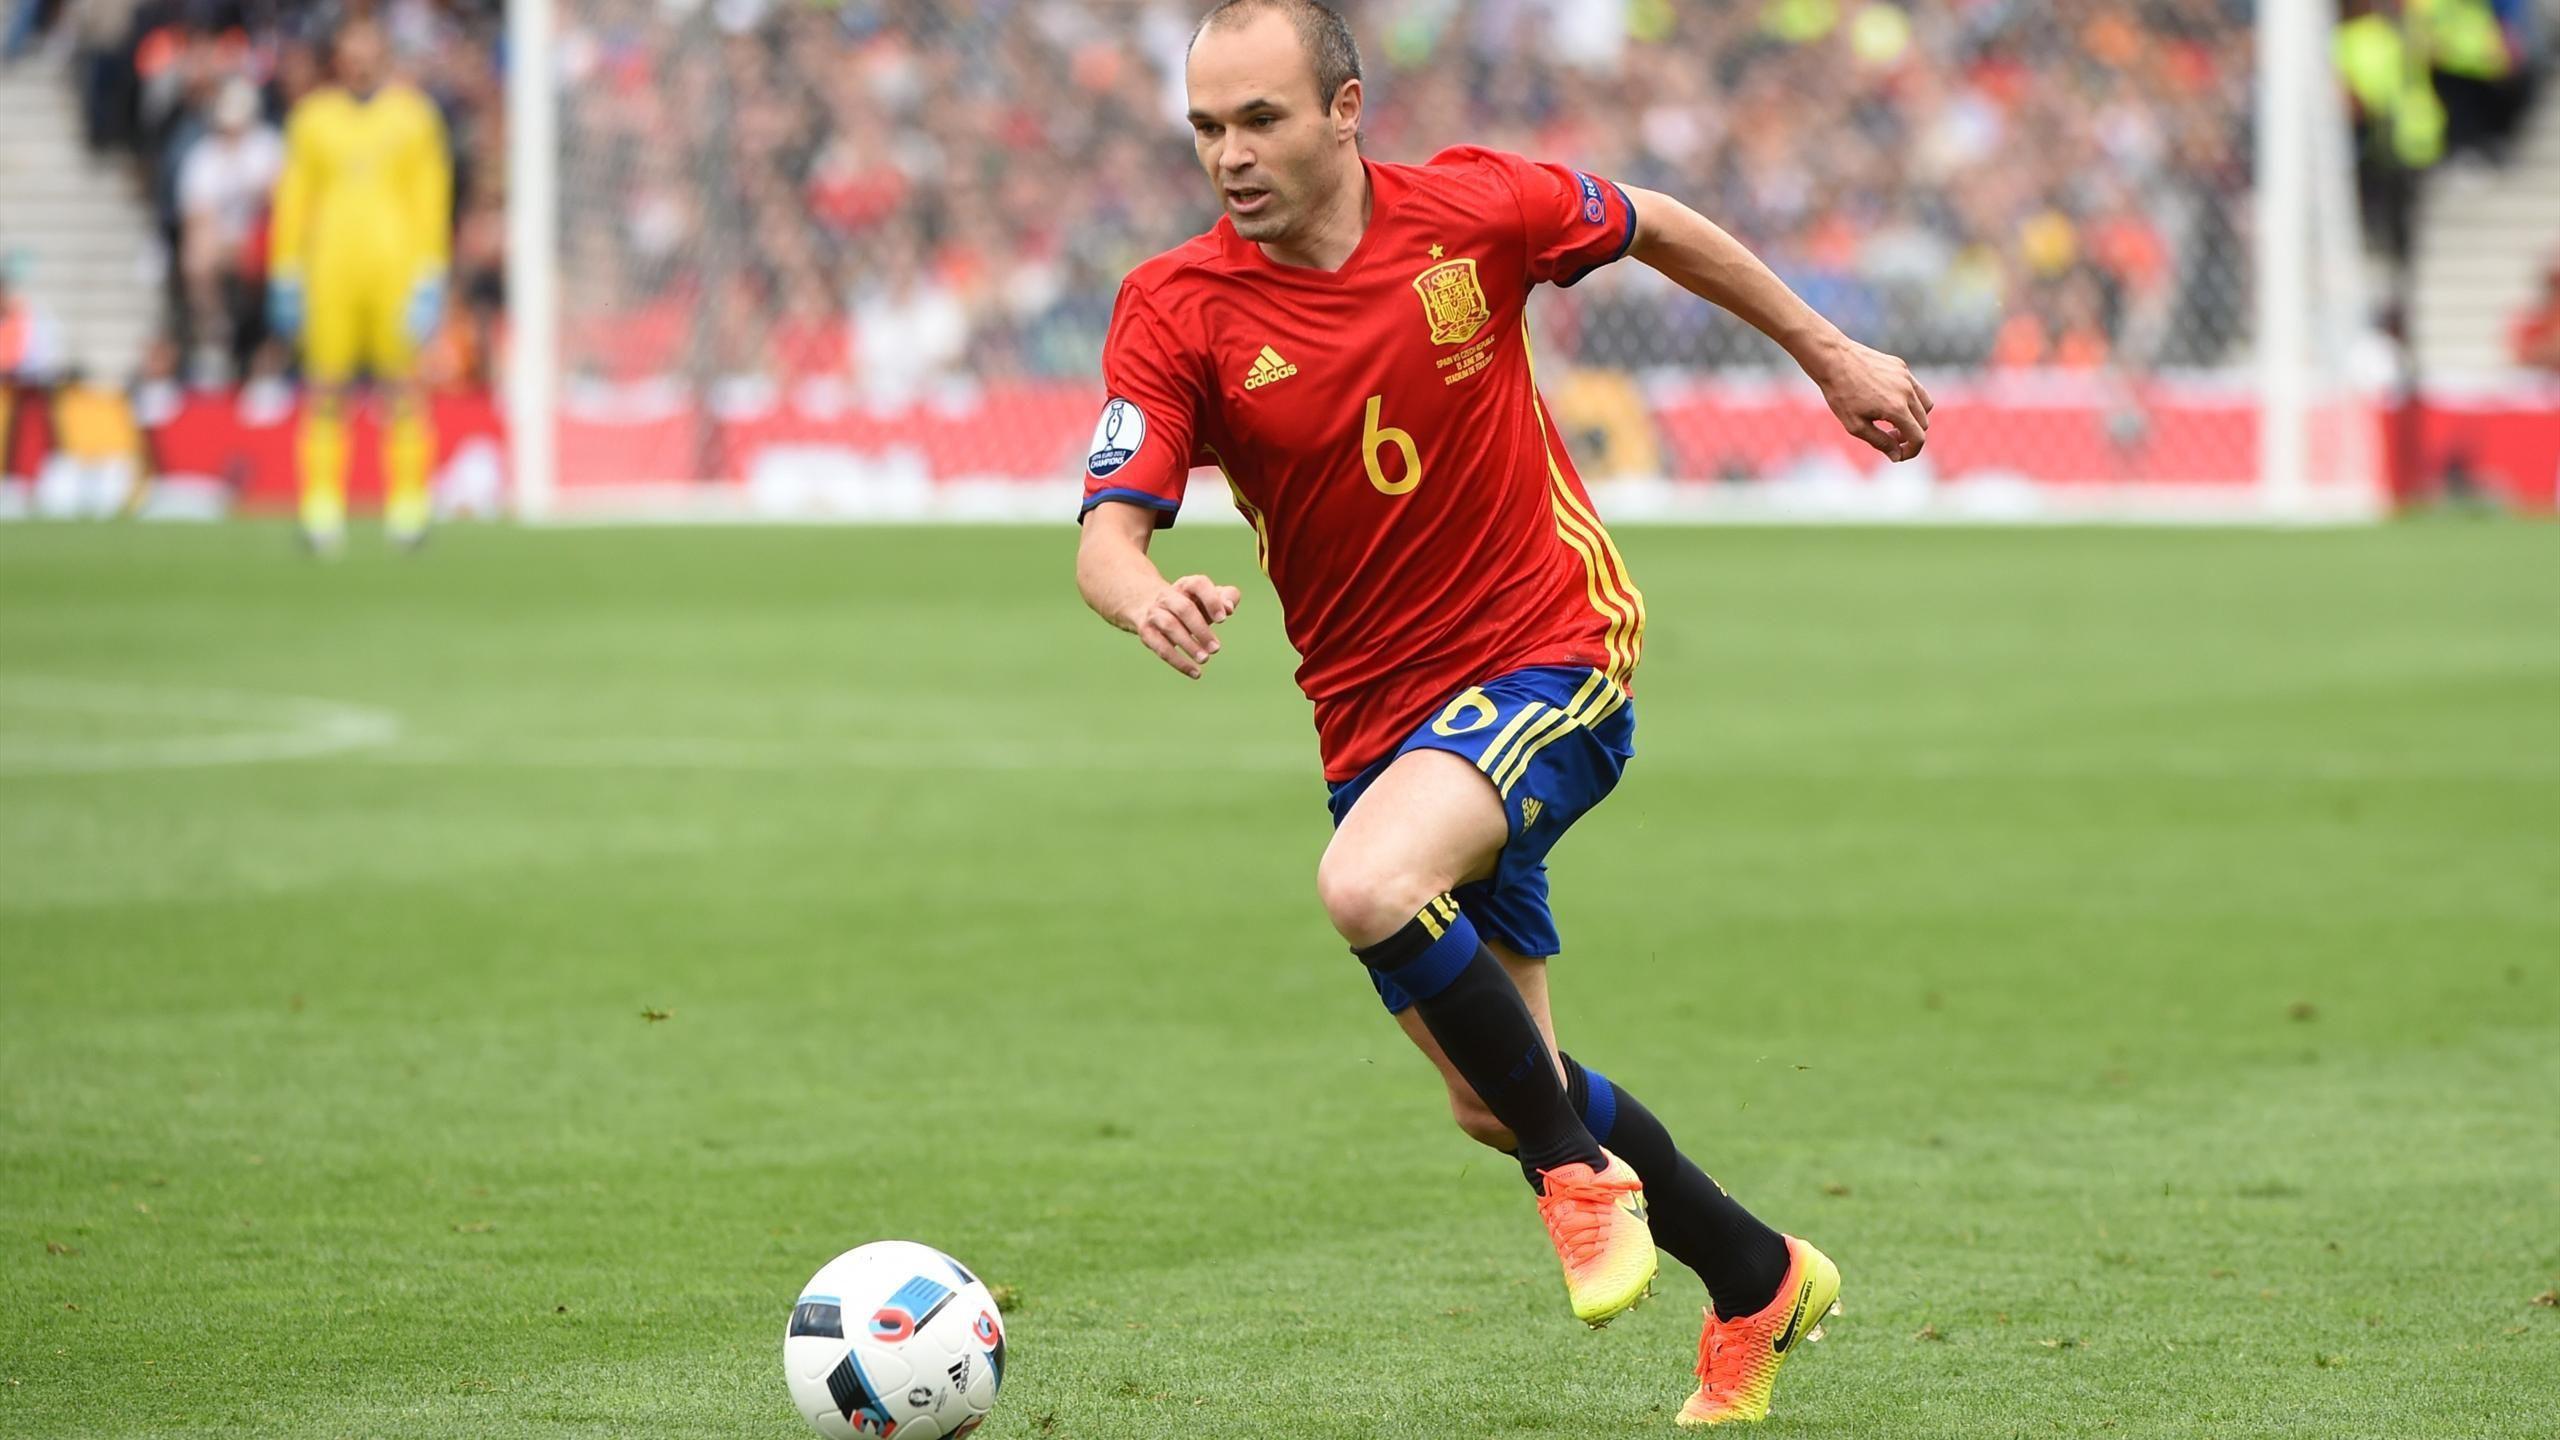 Andres Iniesta Wallpaper Image Photo Picture Background